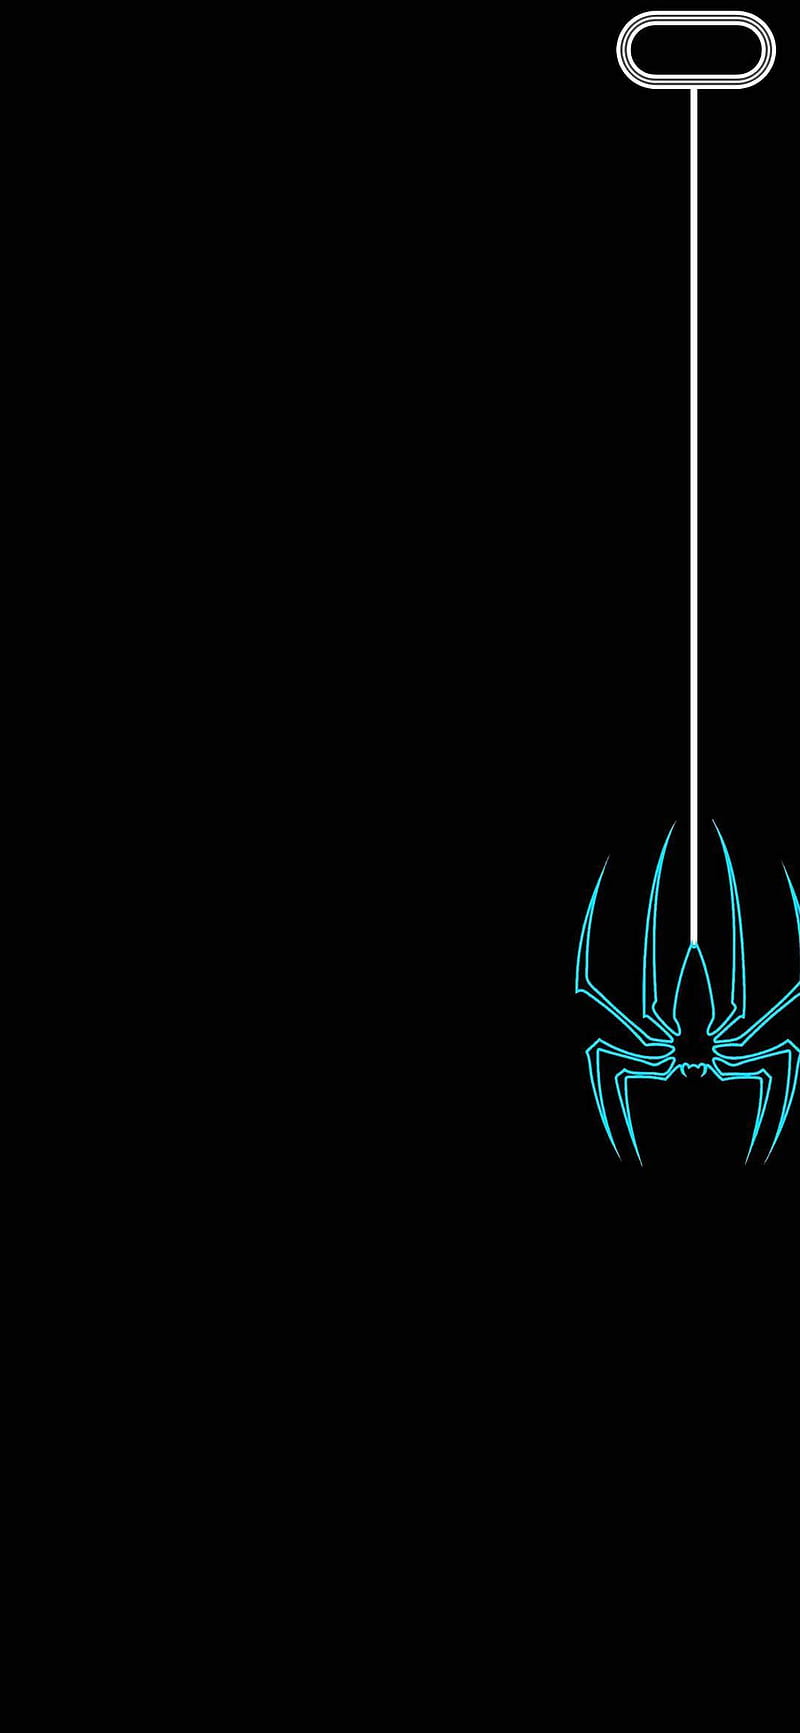 Marvel Black Panther Minimal Wallpaper, HD Minimalist 4K Wallpapers, Images  and Background - Wallpapers Den